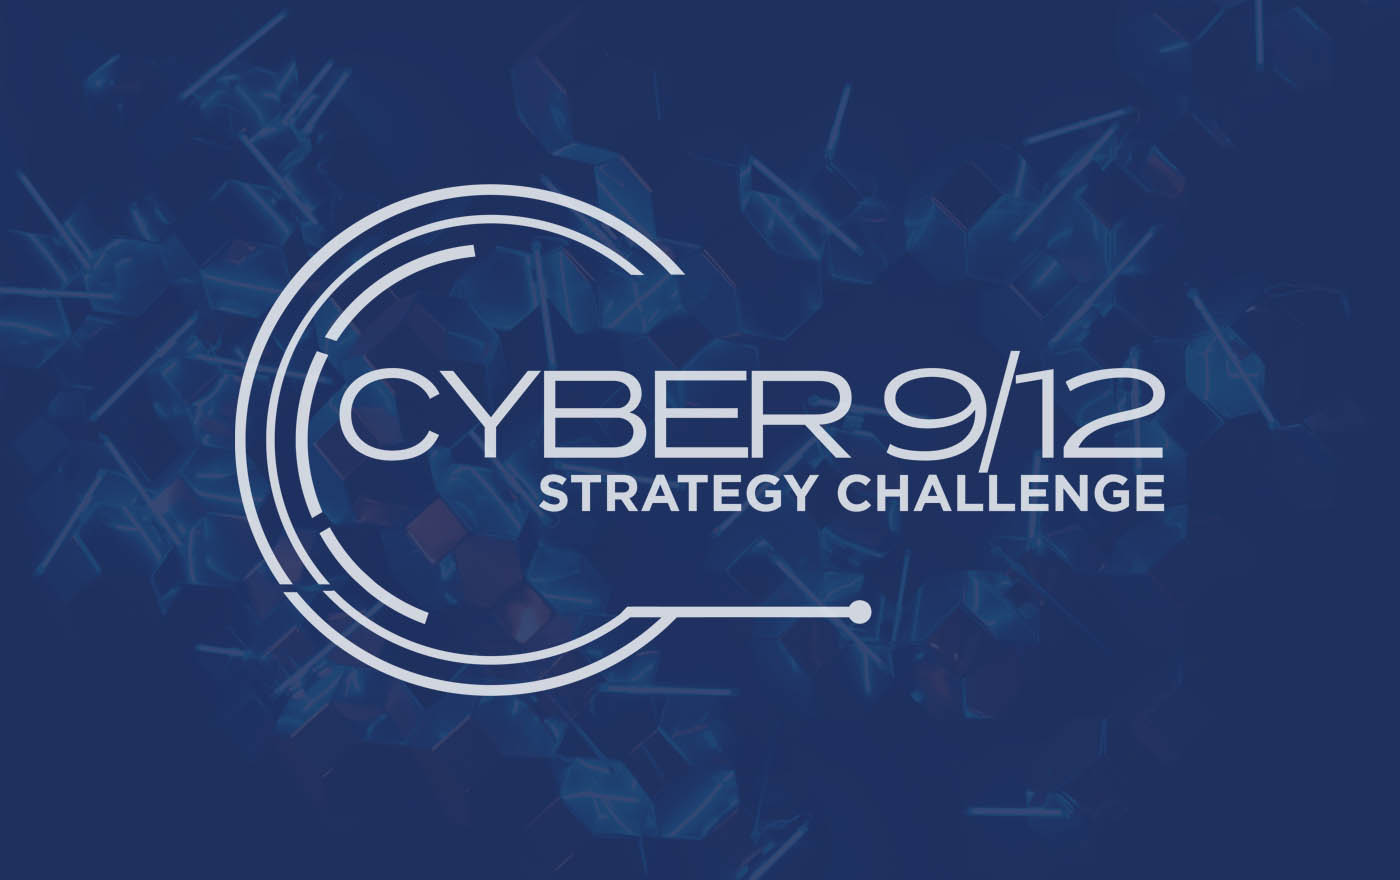 MA Cyber Crime and Terrorism Students Make it to the UK Cyber 9/12 Strategy Challenge Finals